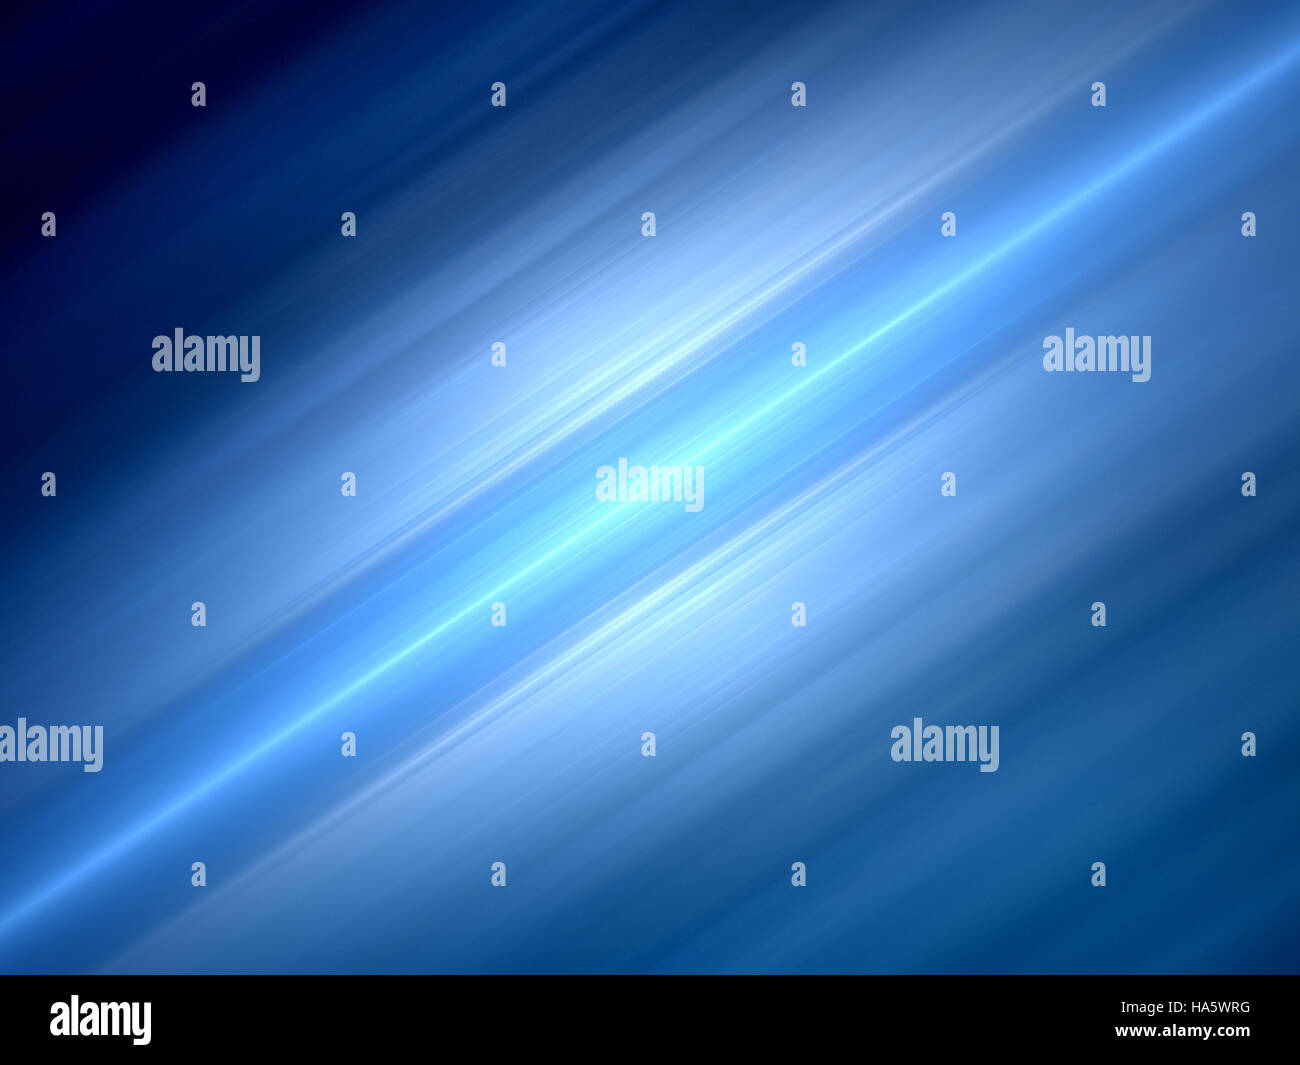 Blue glowing diagonal motion blur, computer generated abstract background, 3D render Stock Photo